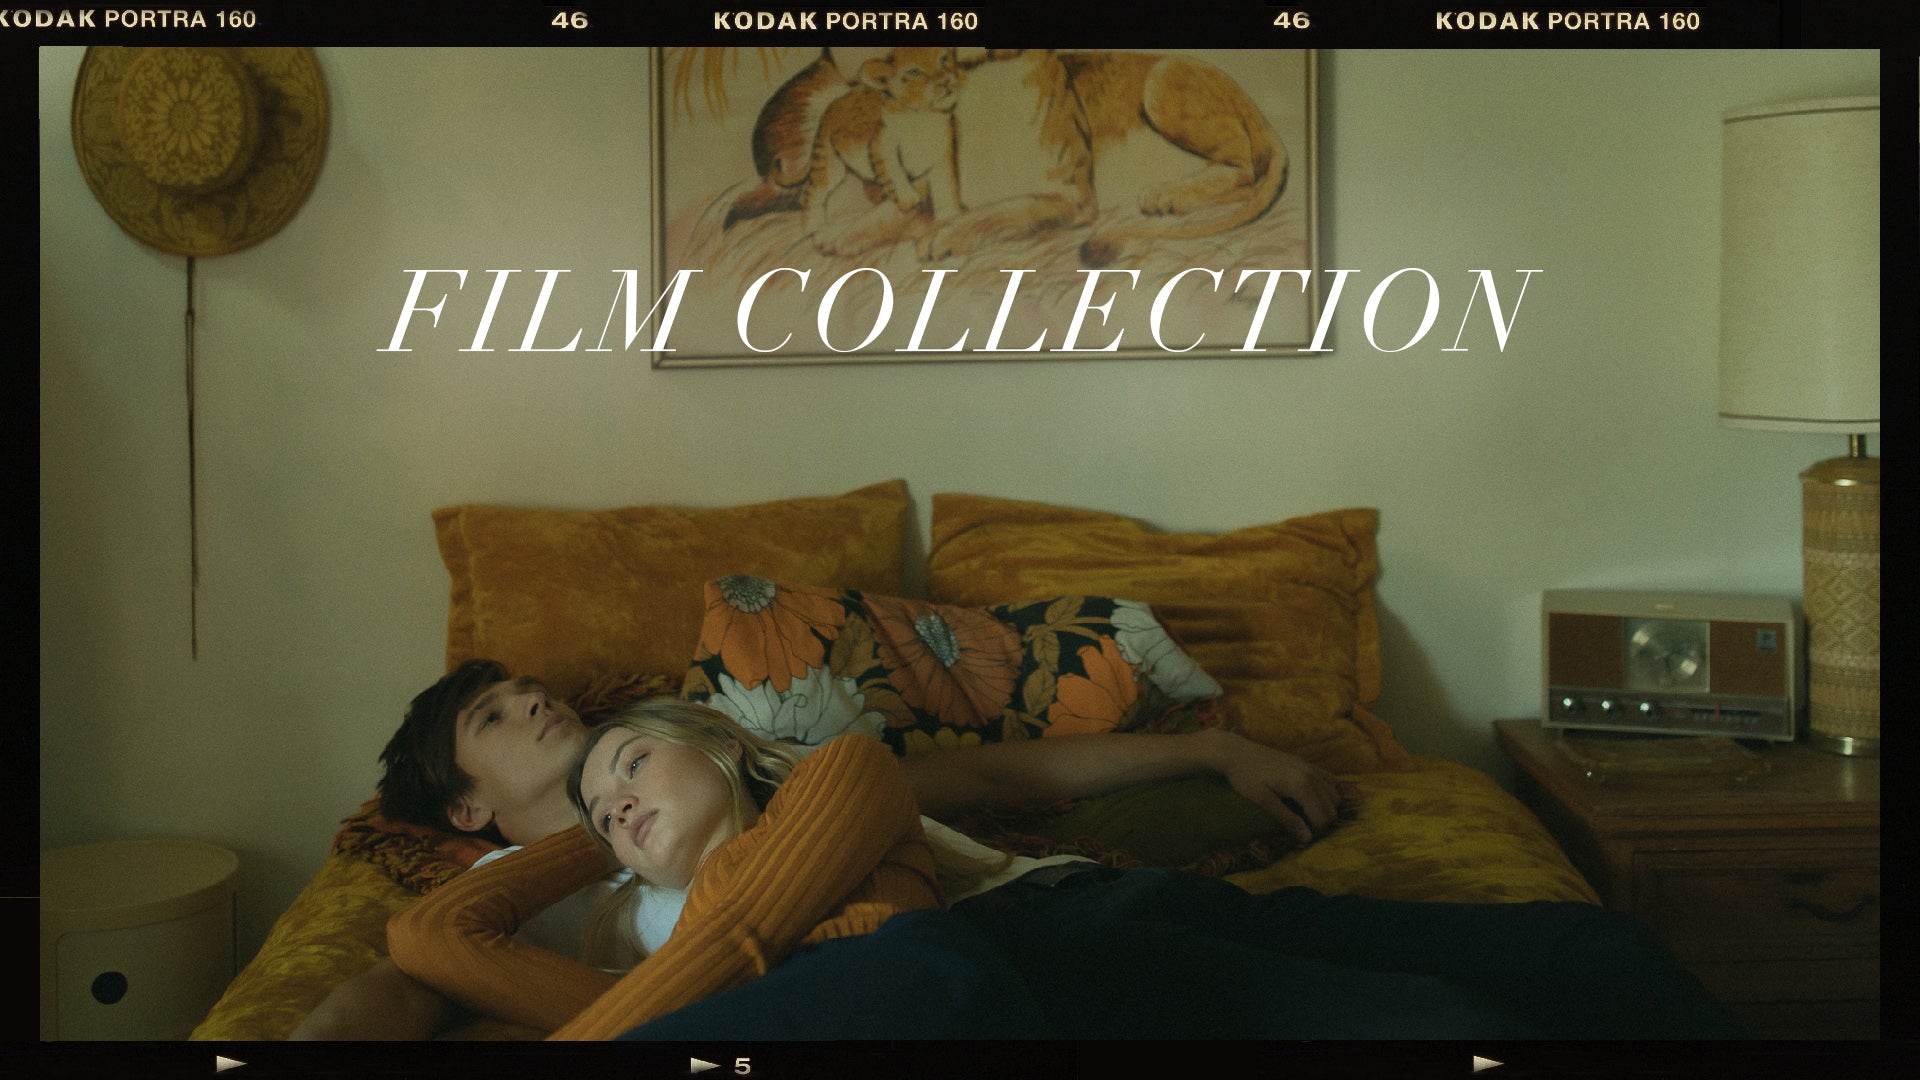 The Film Emulation Collection